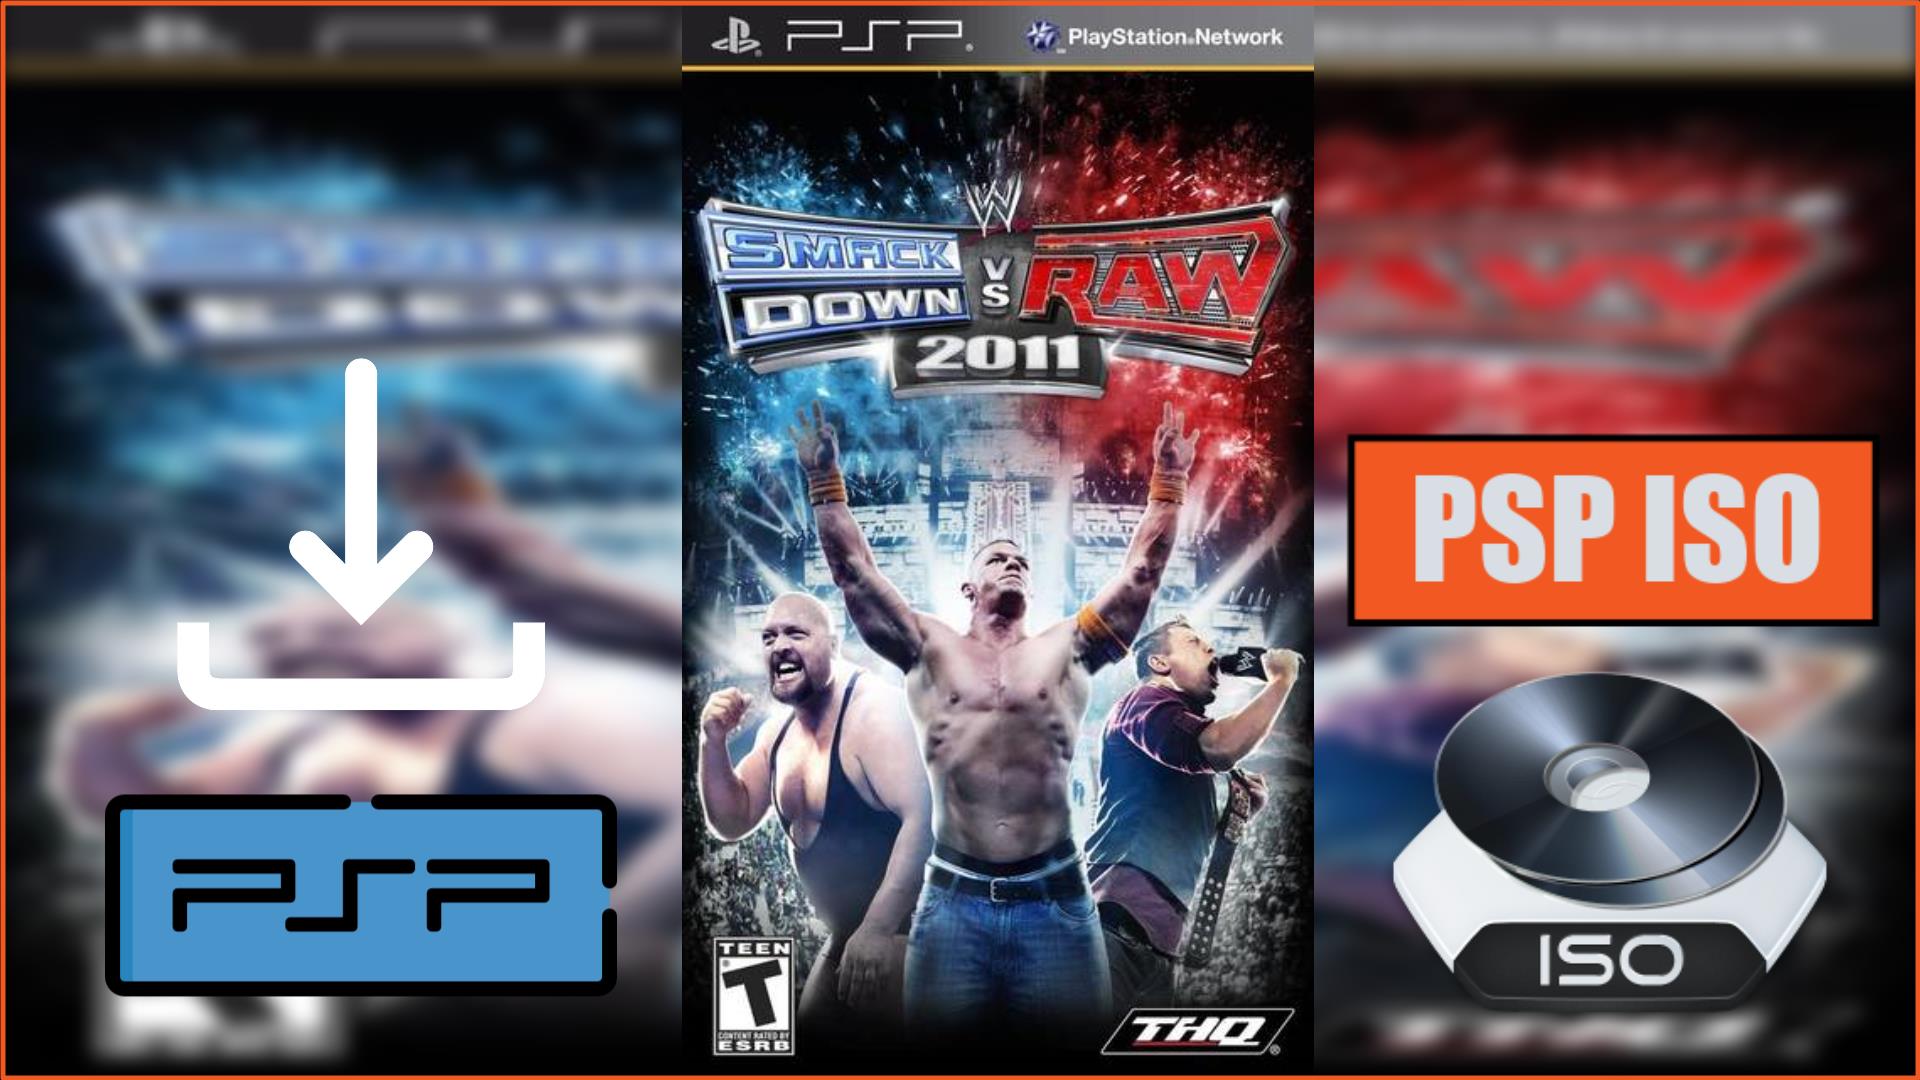 WWE SmackDown vs. RAW 2011 PSP ISO Download